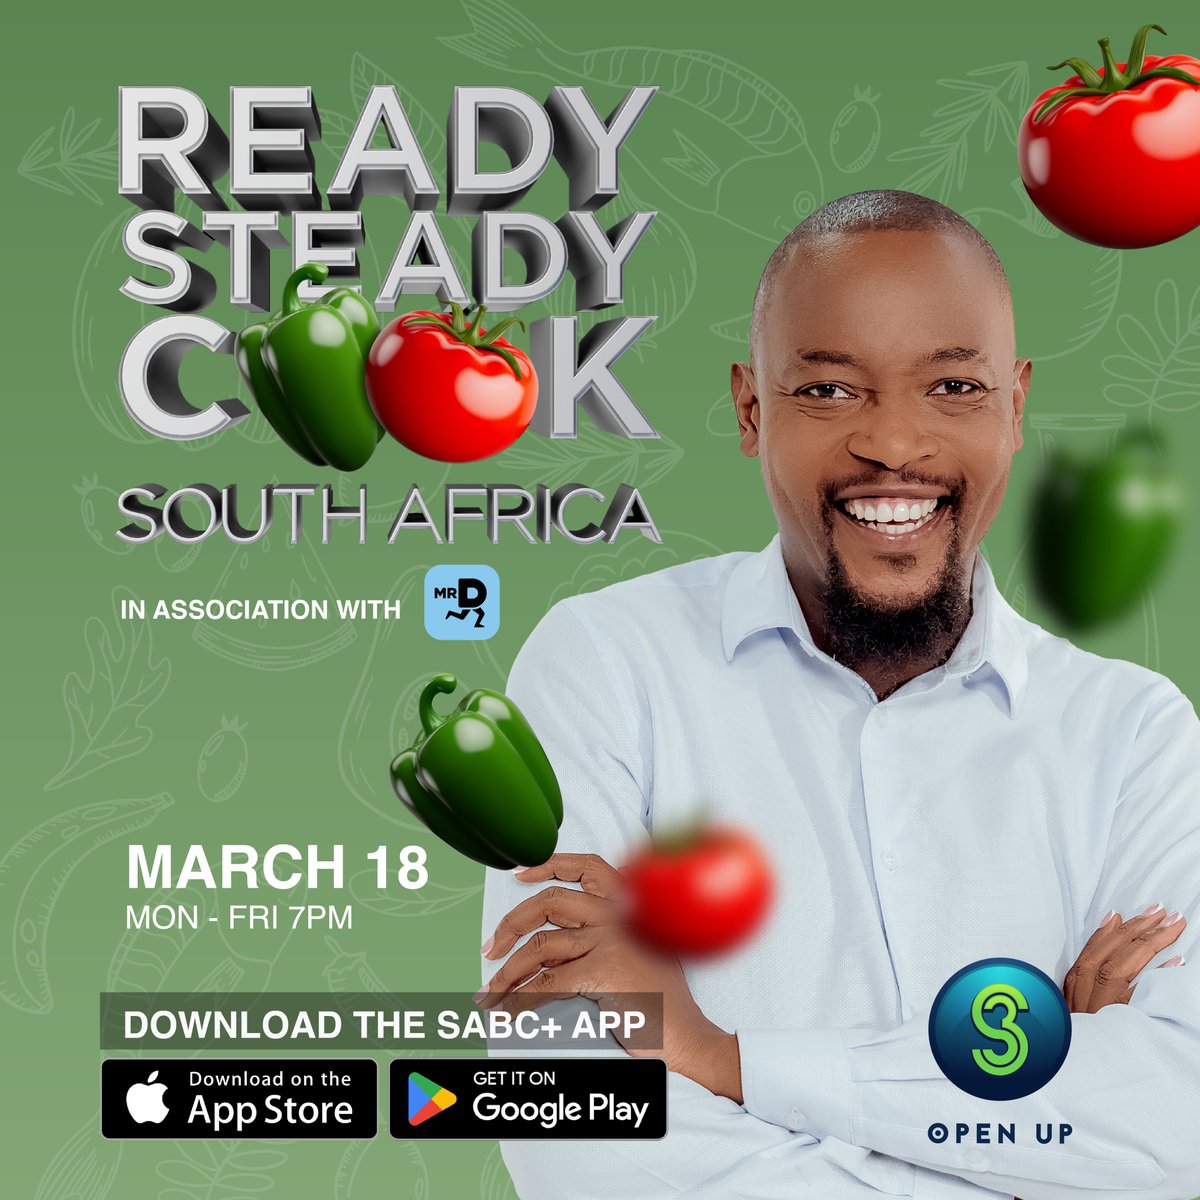 Great meals don't just happen by accident. You have towatch #ReadySteadyCookSA. Catch it weekdays from 18 March at 7 pm and channel your inner 5-star chef.

#ChannelABetterYou #NewEntertainment #S3OpenUp